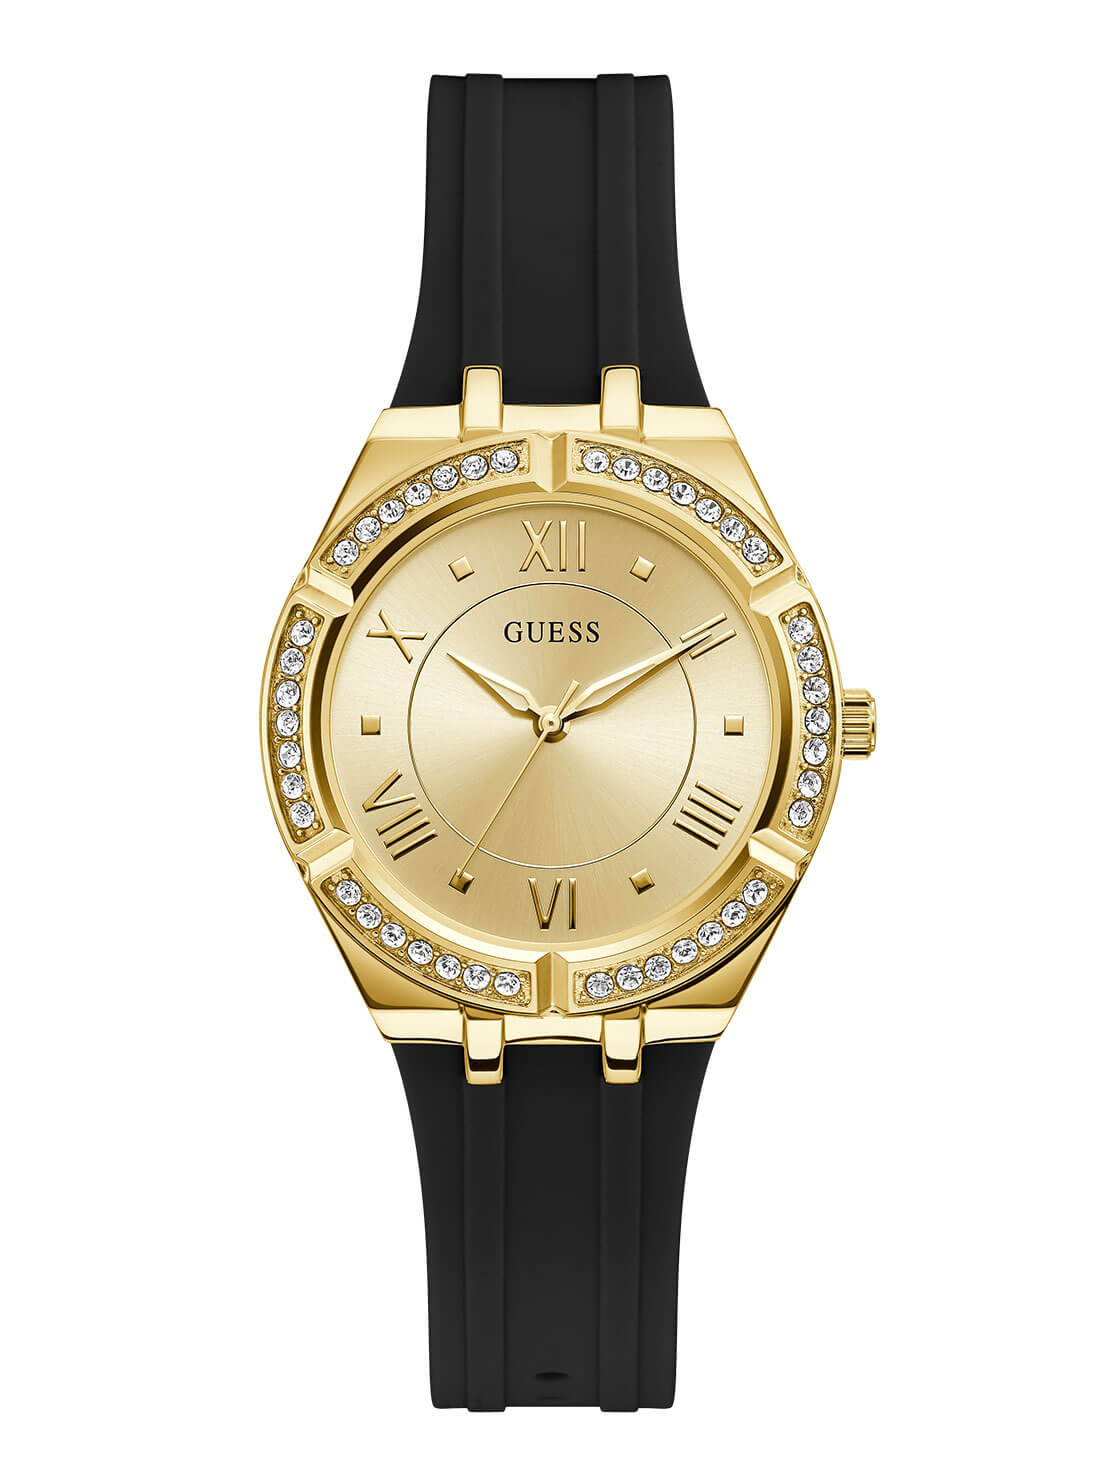 GUESS Women's Black and Gold Cosmo Watch GW0034L1 Front View